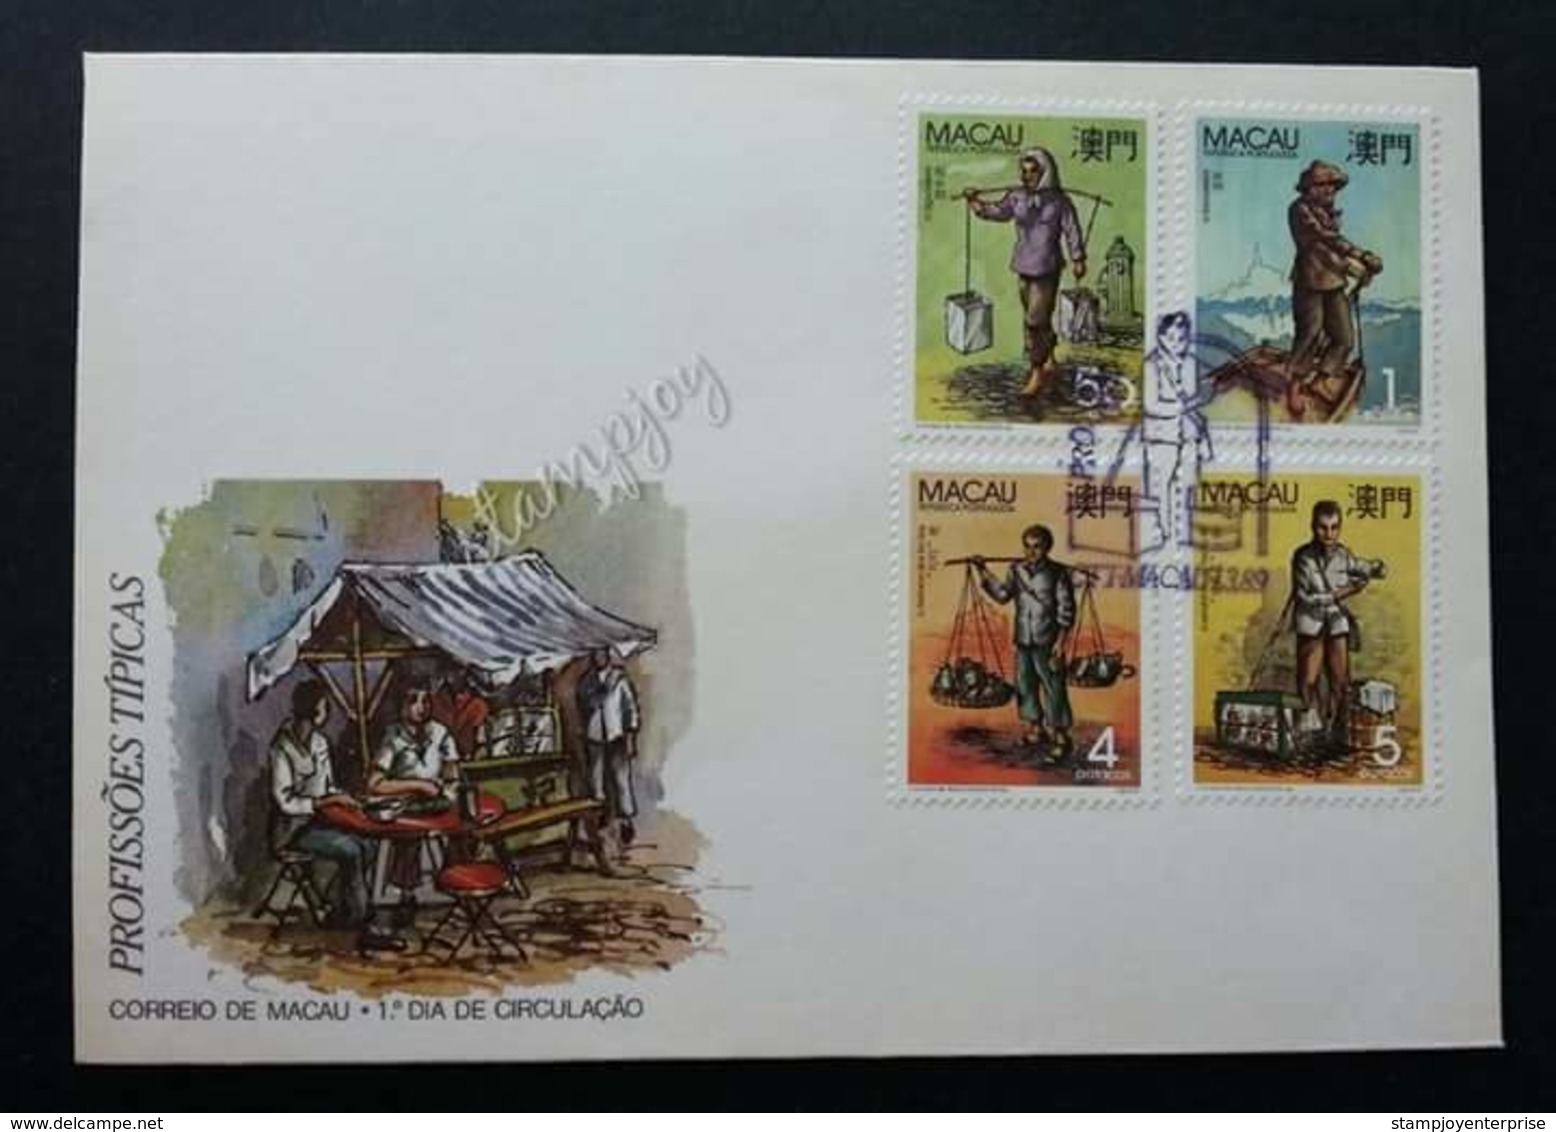 Macau Macao China Typical Occupations (I) 1989 Career Job (stamp FDC)  *minor Toning At Borner Cover - Covers & Documents